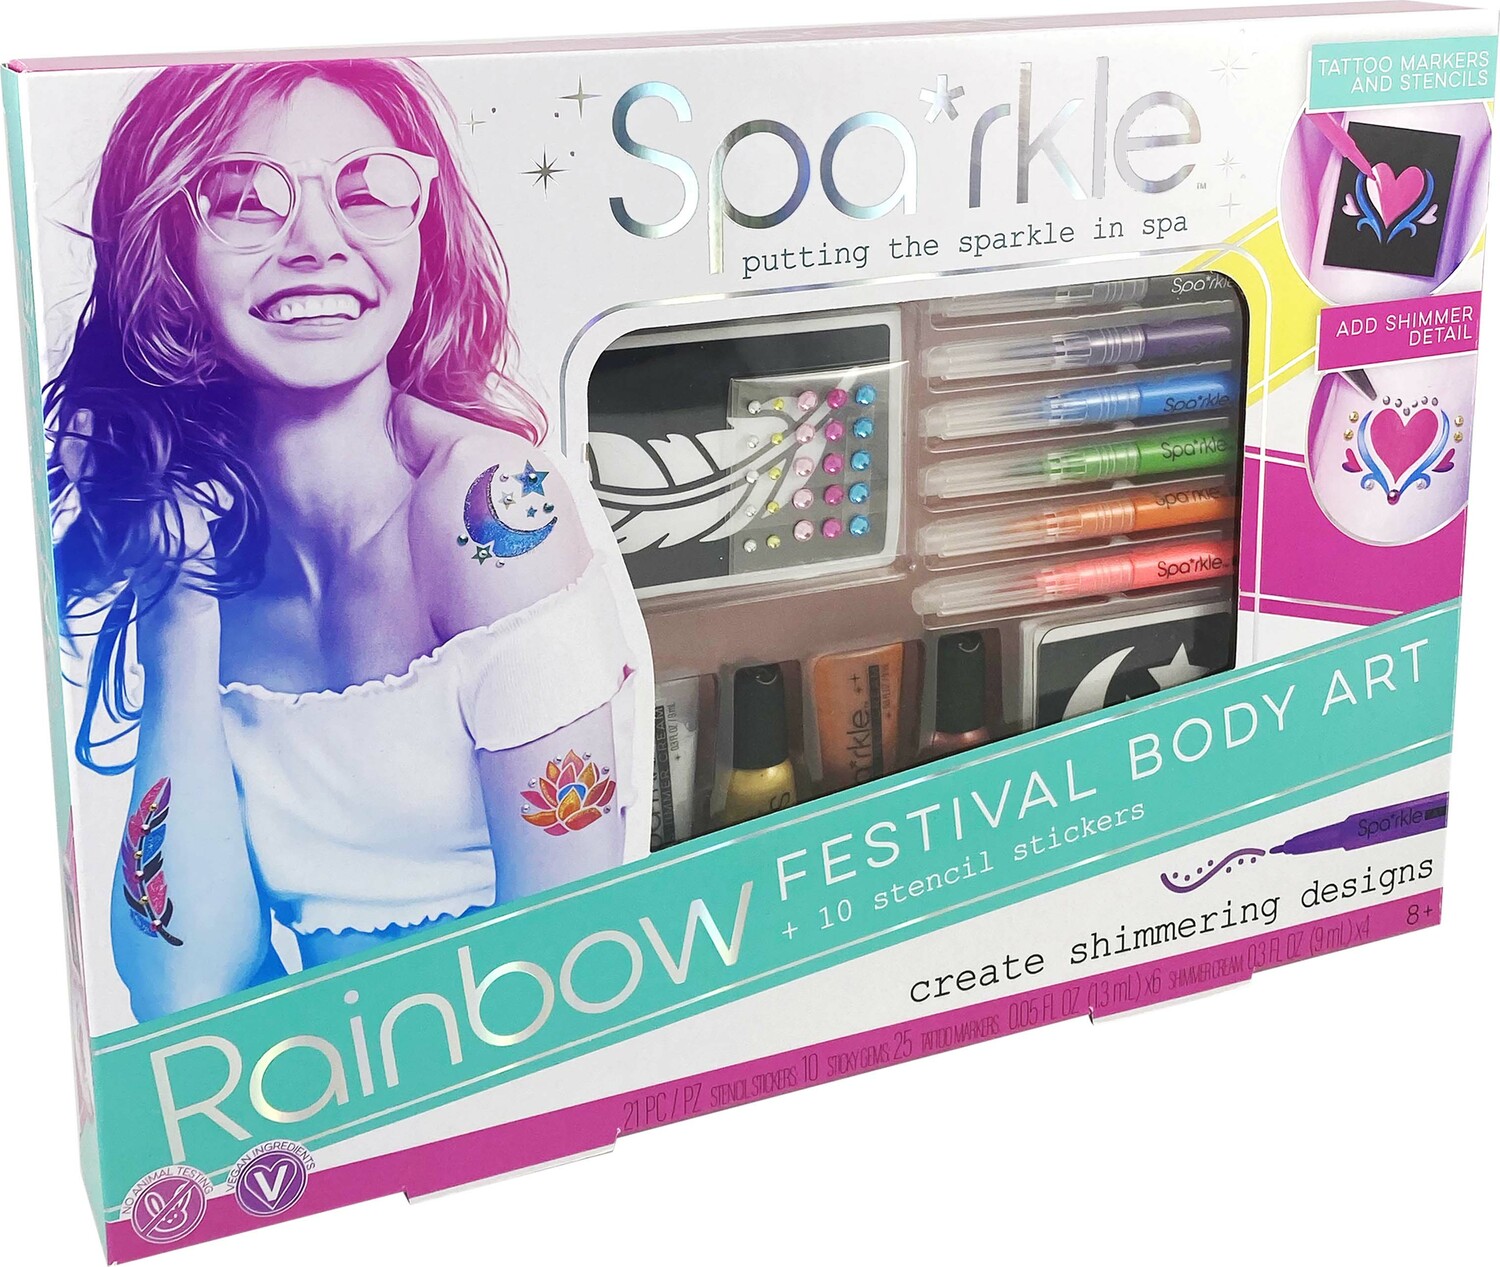 Sketch and Sparkle Tattoo Pens - Over the Rainbow